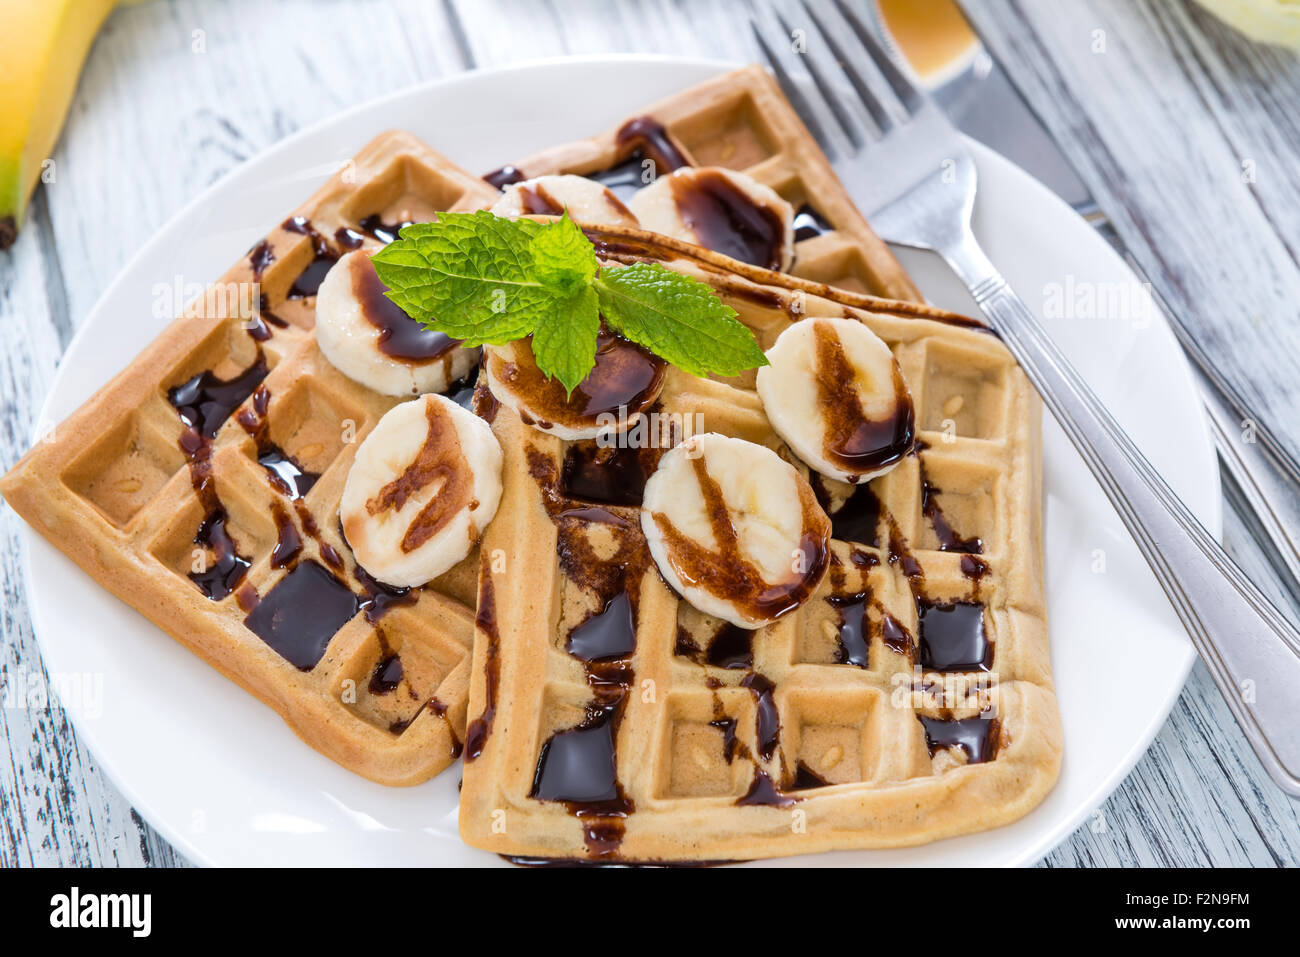 Breakfast table (Waffles with Bananas and Chocolate Sauce as close-up shot) Stock Photo